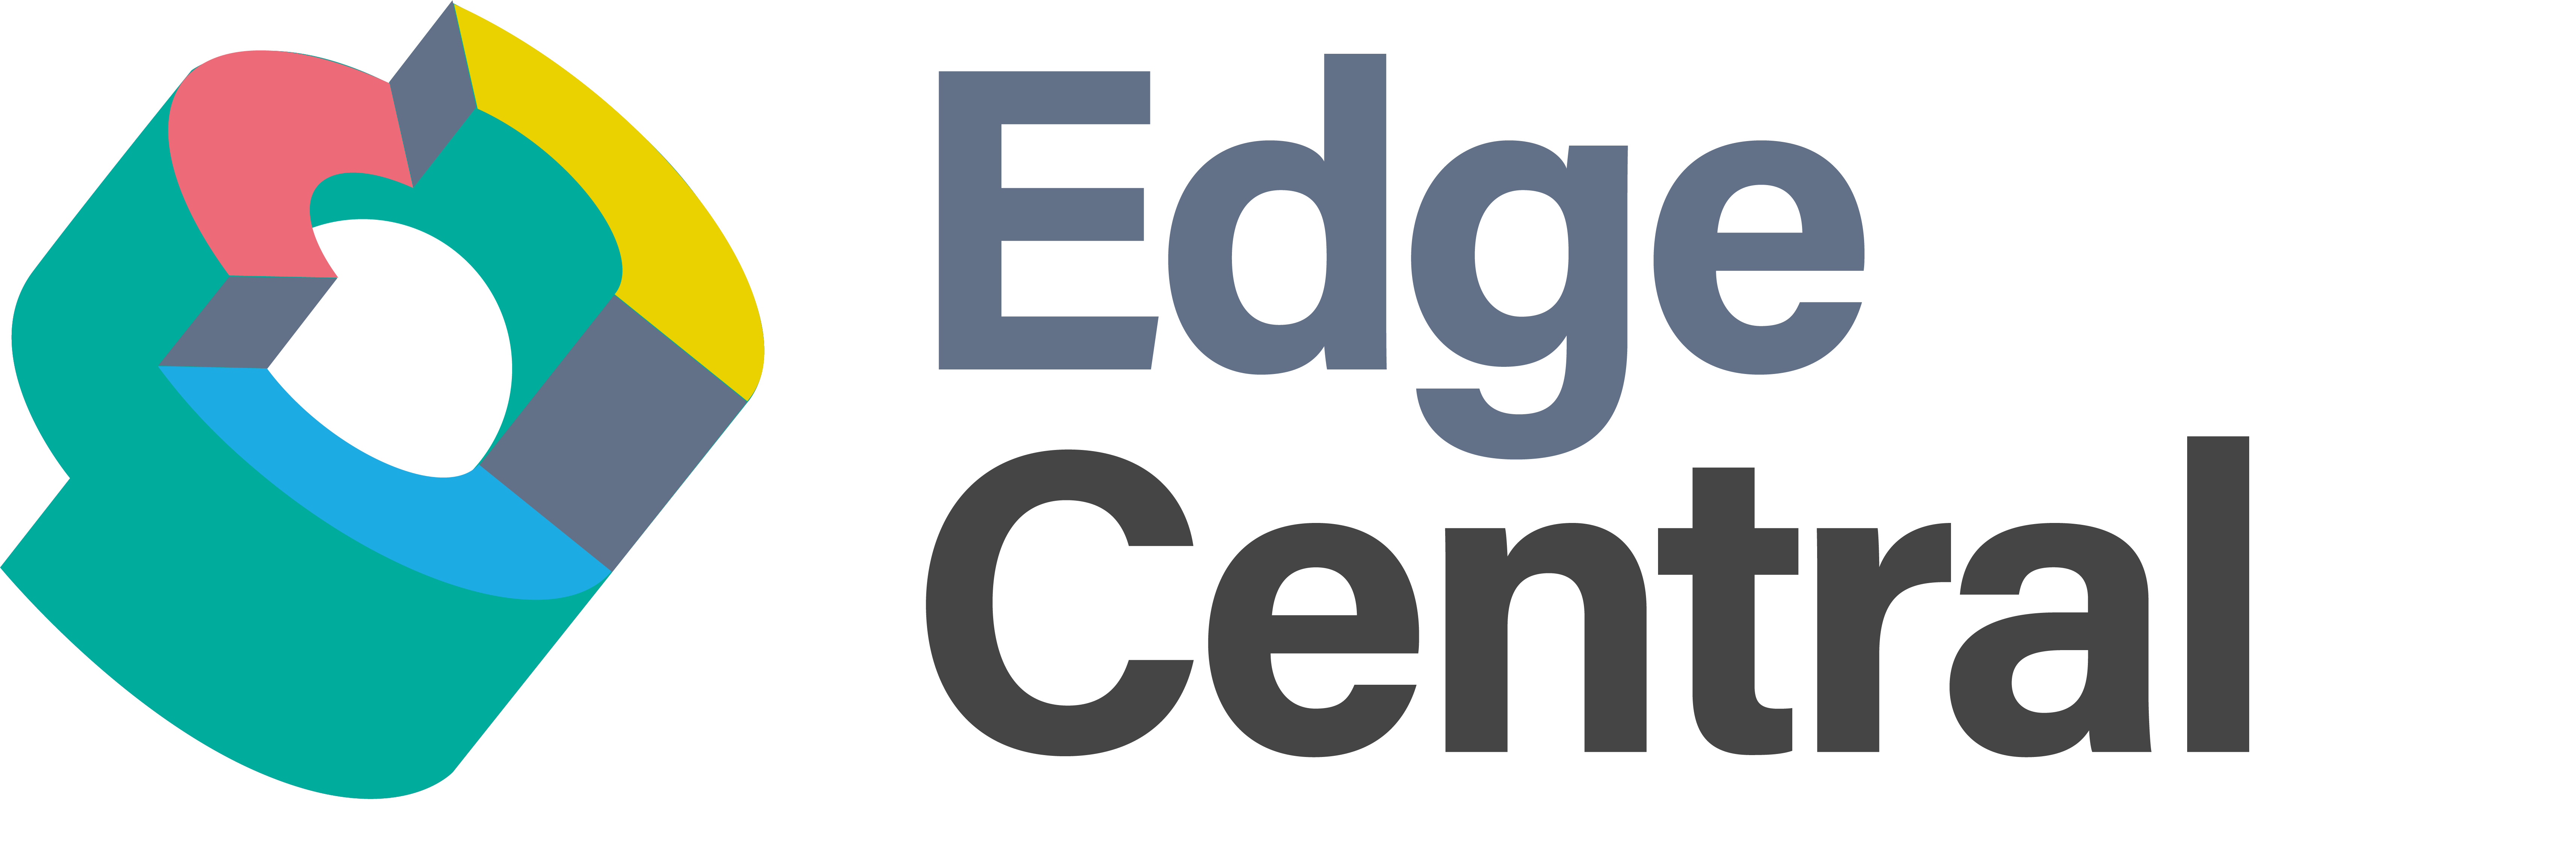 Edge Xrt logo, Battery energy Storage Systems | IOTech Systems, Edge Software Platforms